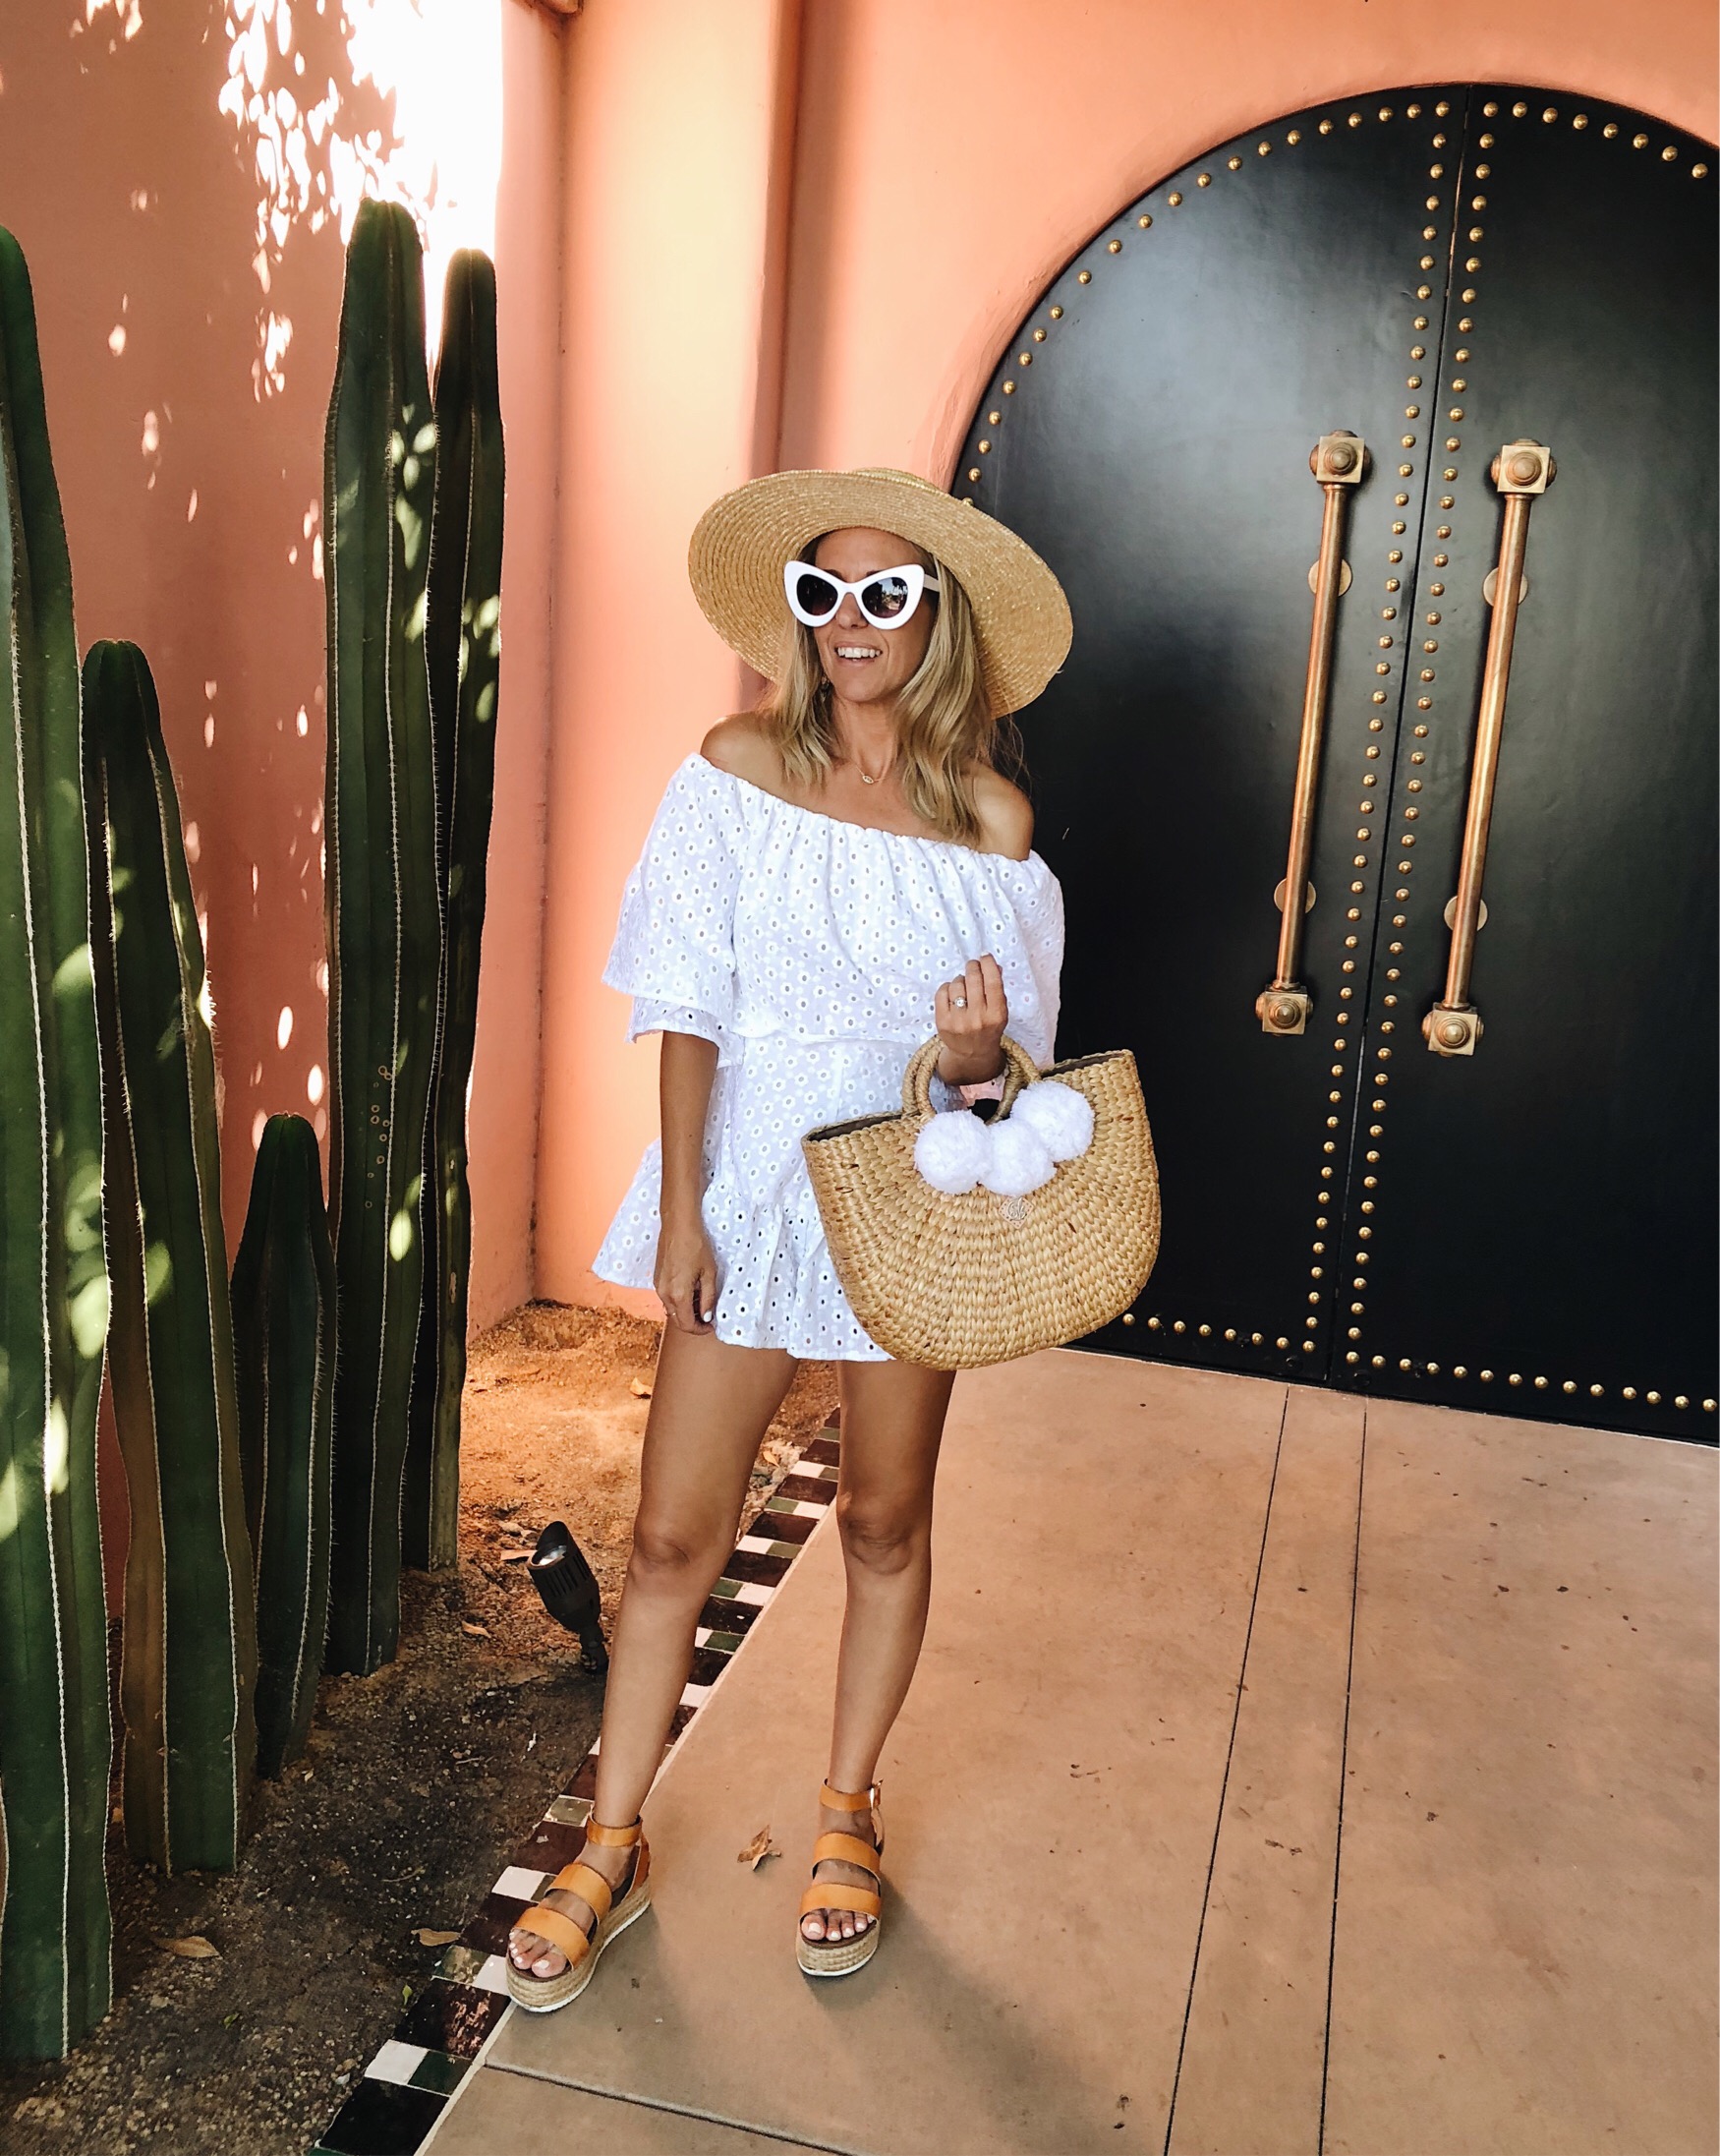 ANNIVERSARY WEEKEND GETAWAY AT THE SANDS HOTEL- Jaclyn De Leon Style + PALM SPRINGS HOTEL + BOHEMIAN + PINK WALL WITH CACTUS + WHITE EYELET ROMPER + RETRO SUNGLASSES + POM POM STRAW BEACH TOTE + WIDE BRIM STRAW HAT + PLATFORM SANDALS + ASOS OUTFIT + SUMMER STYLE + VACATION + TRAVEL